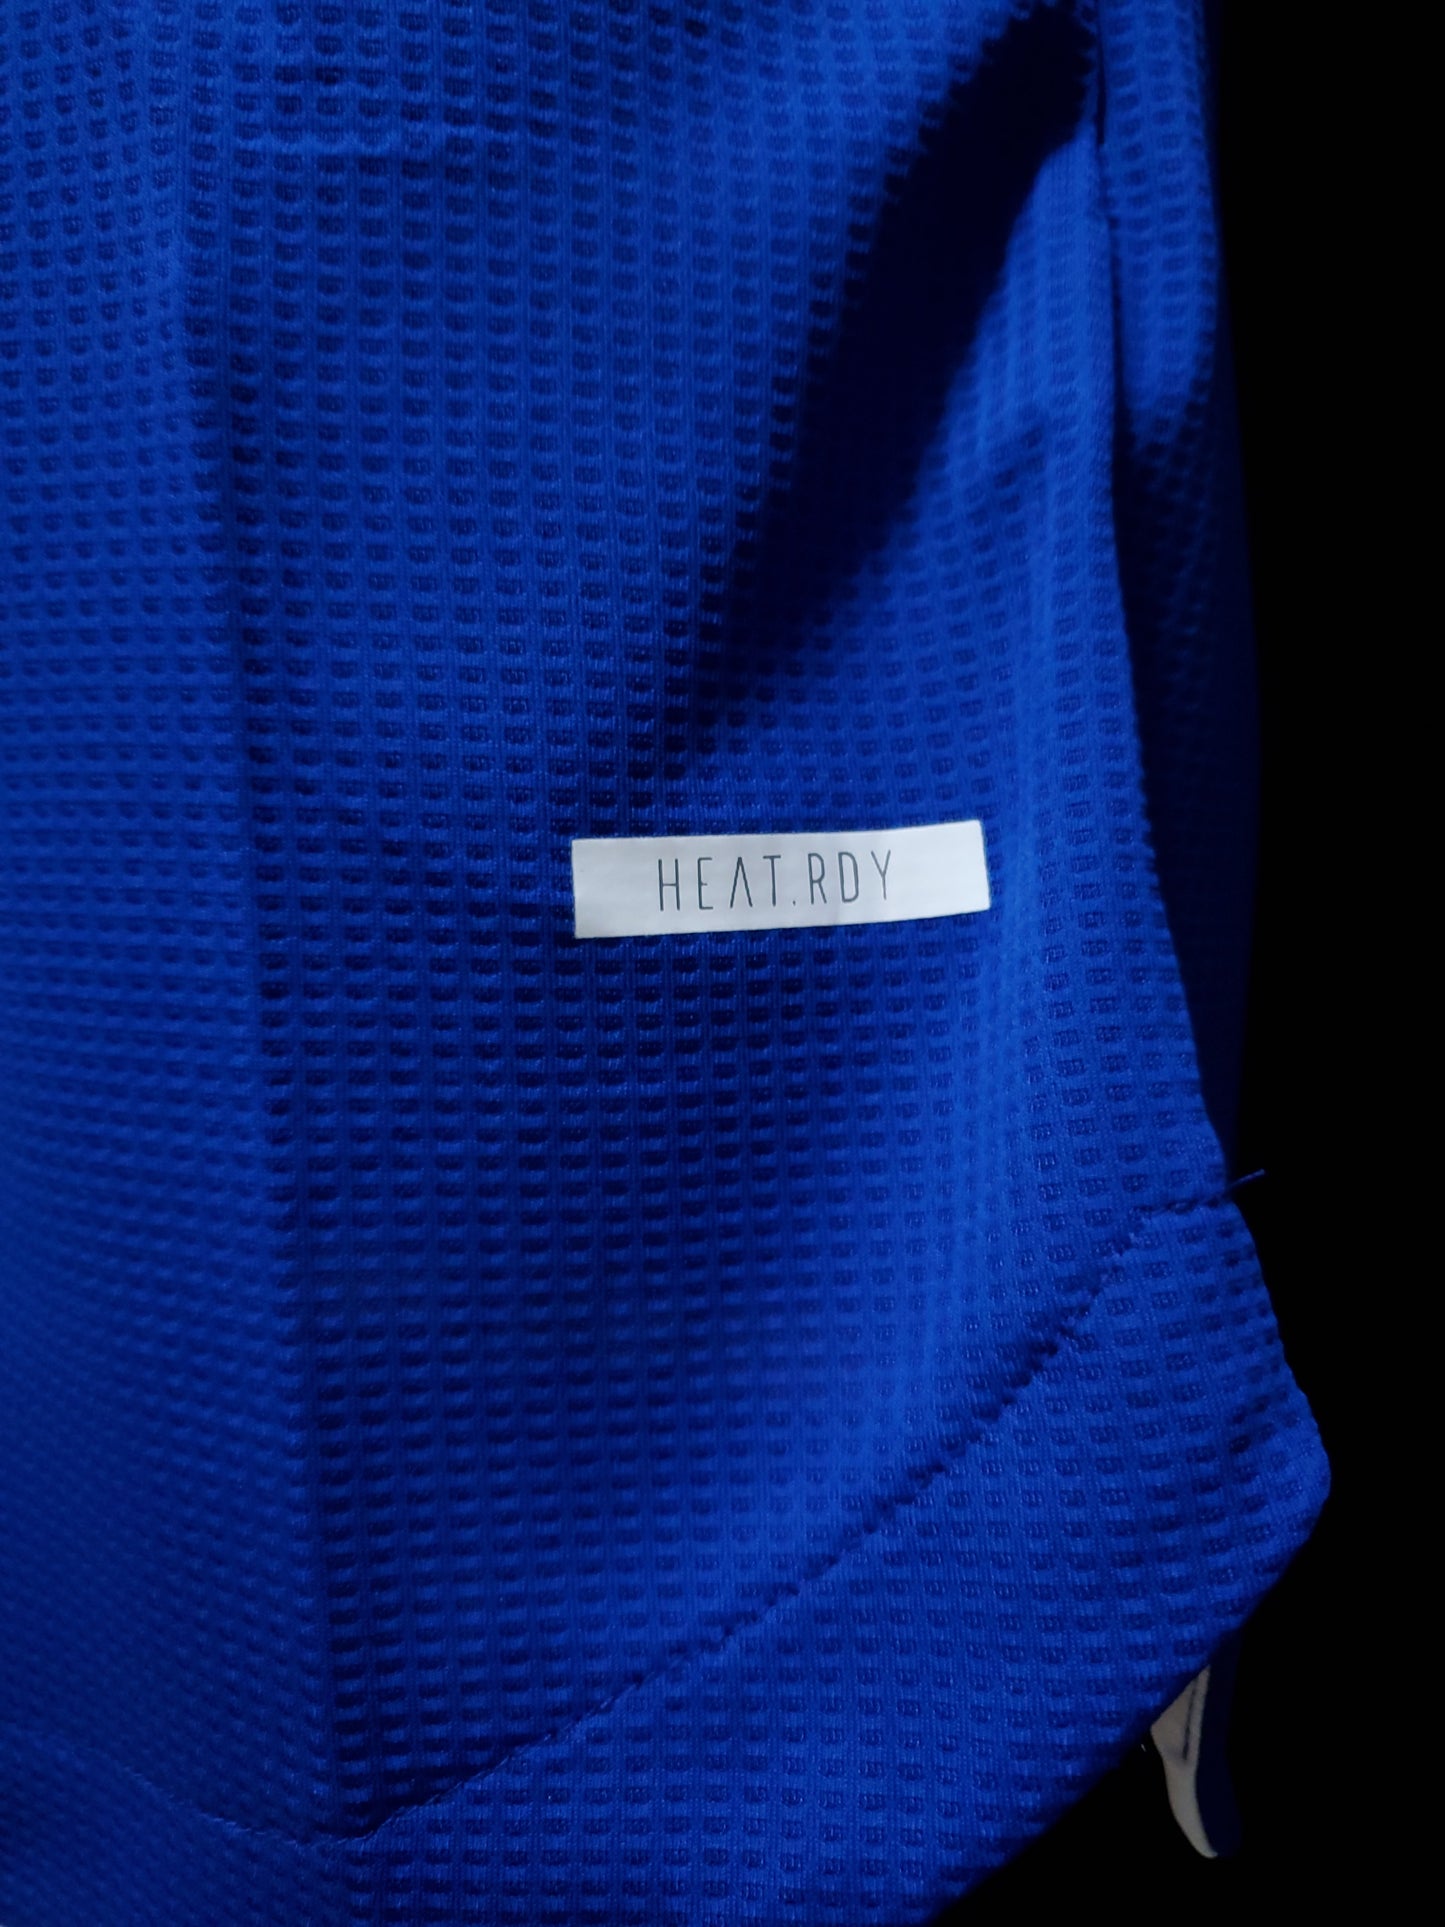 Leicester City home Jersey